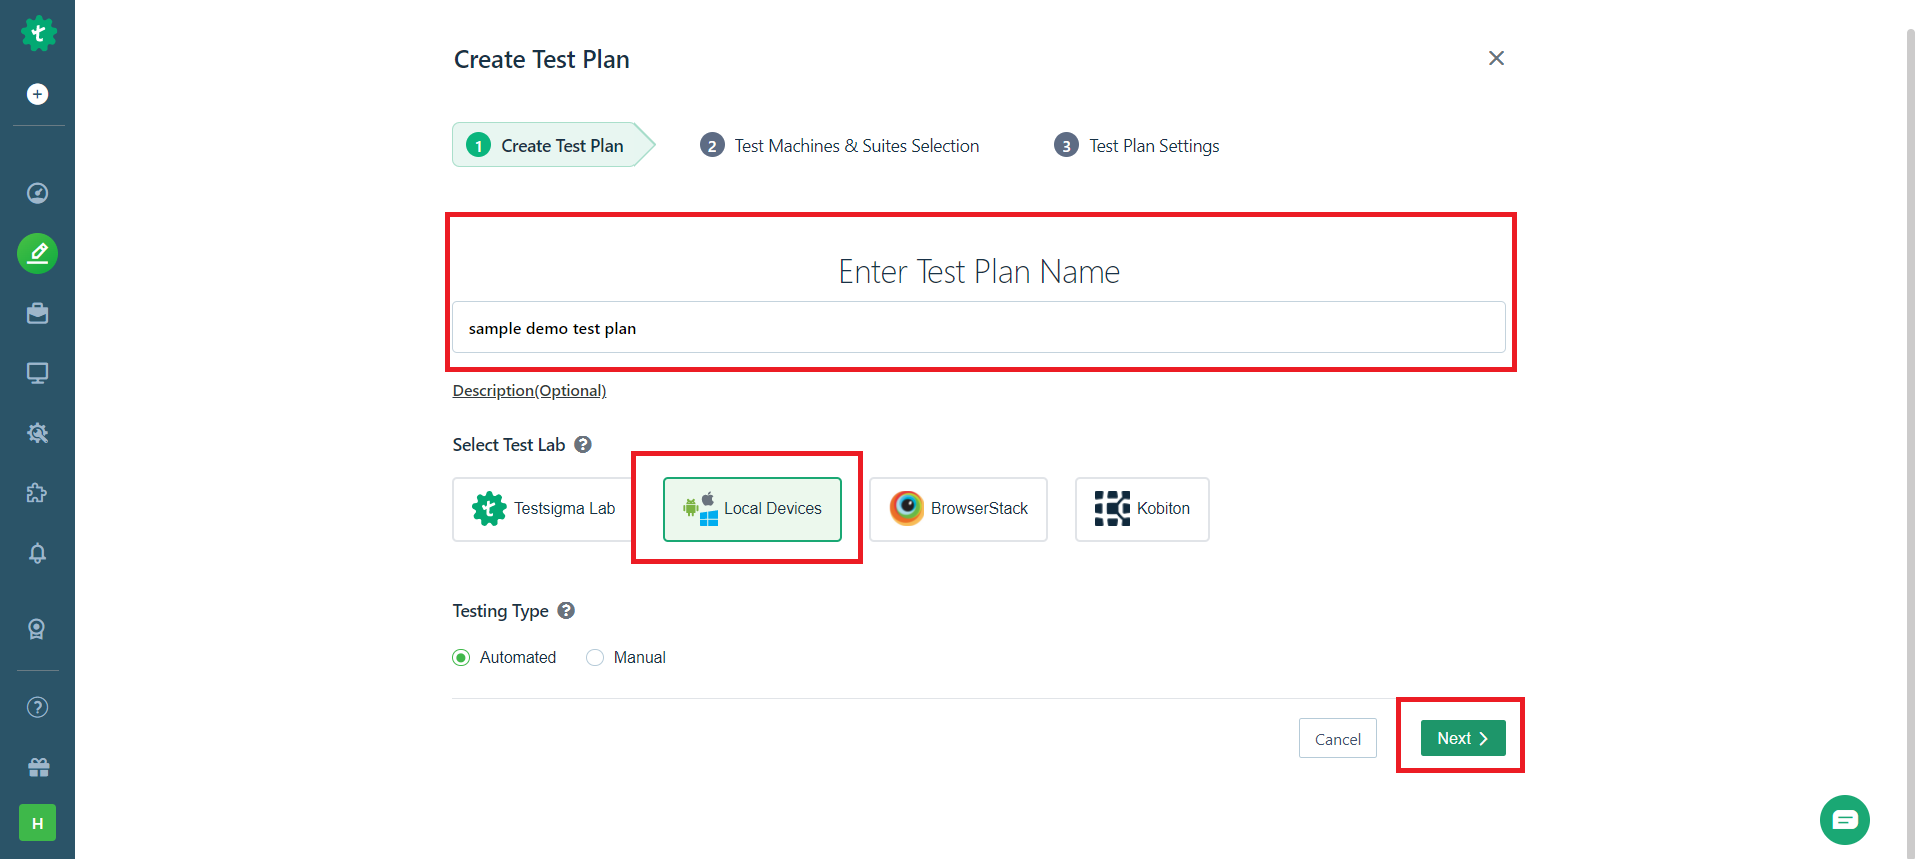 Add a new test plan name